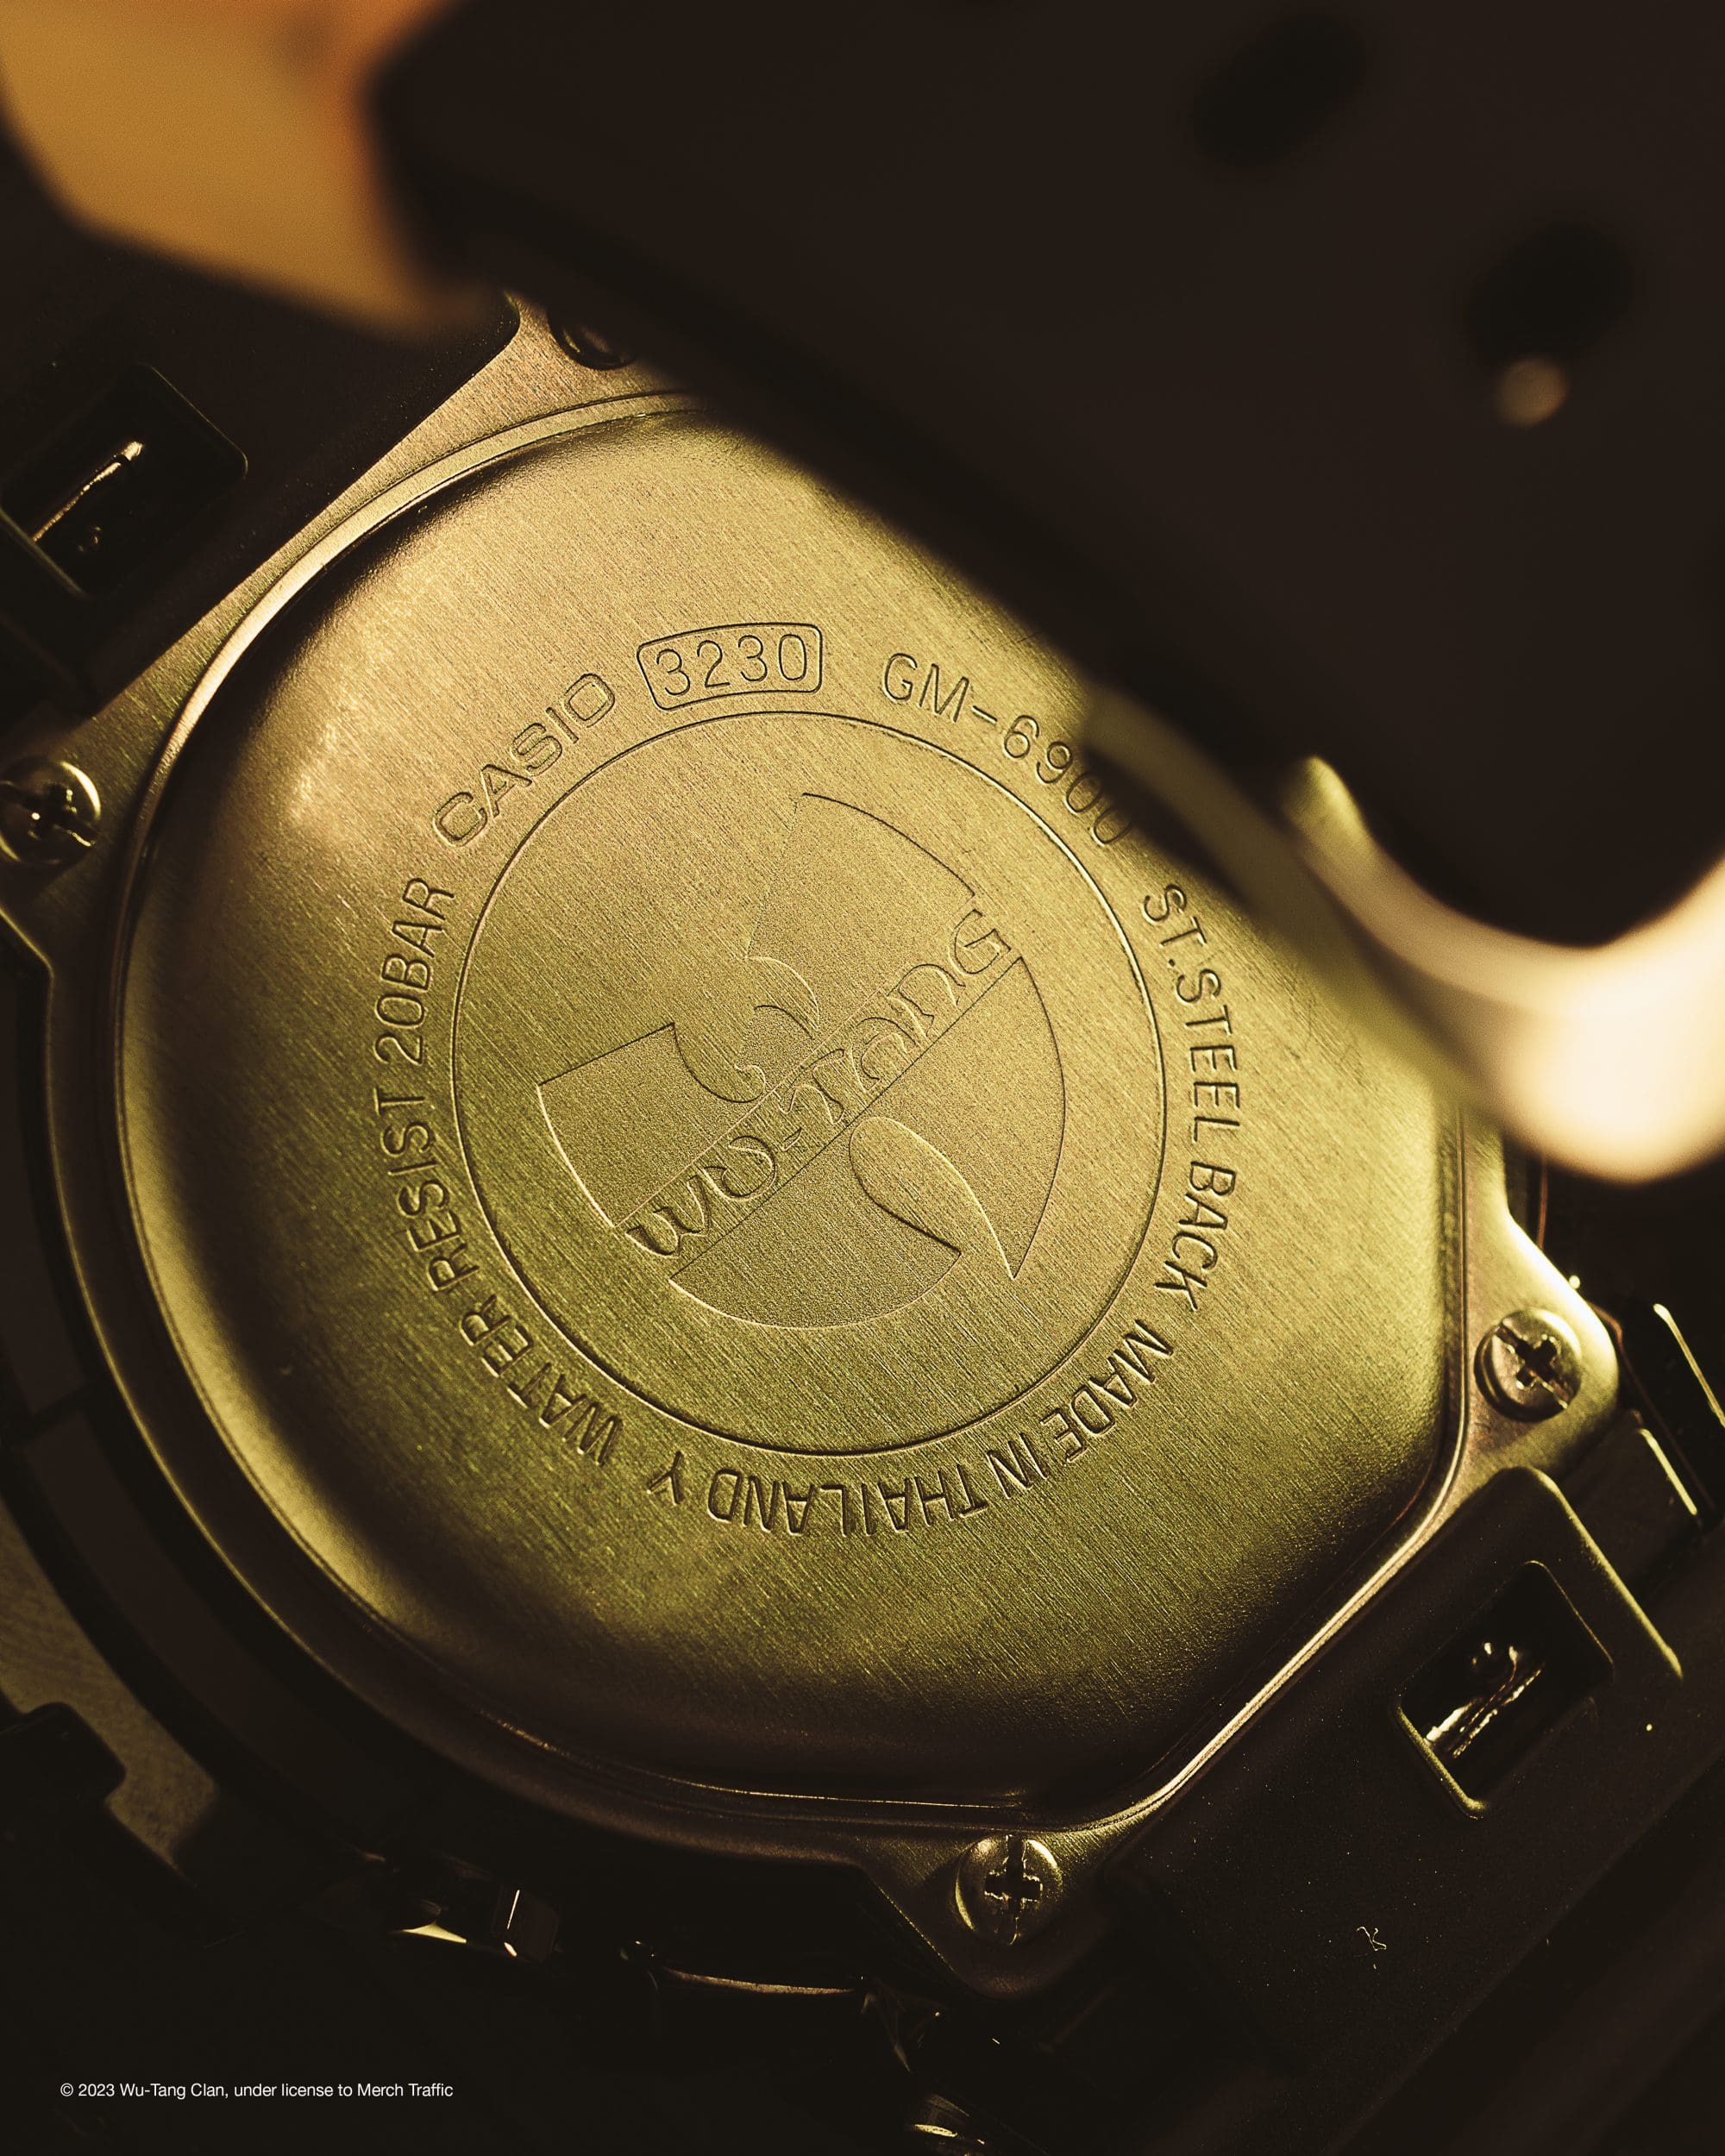 Close up shot of Wu-Tang logo on the special engraving on the watch case back